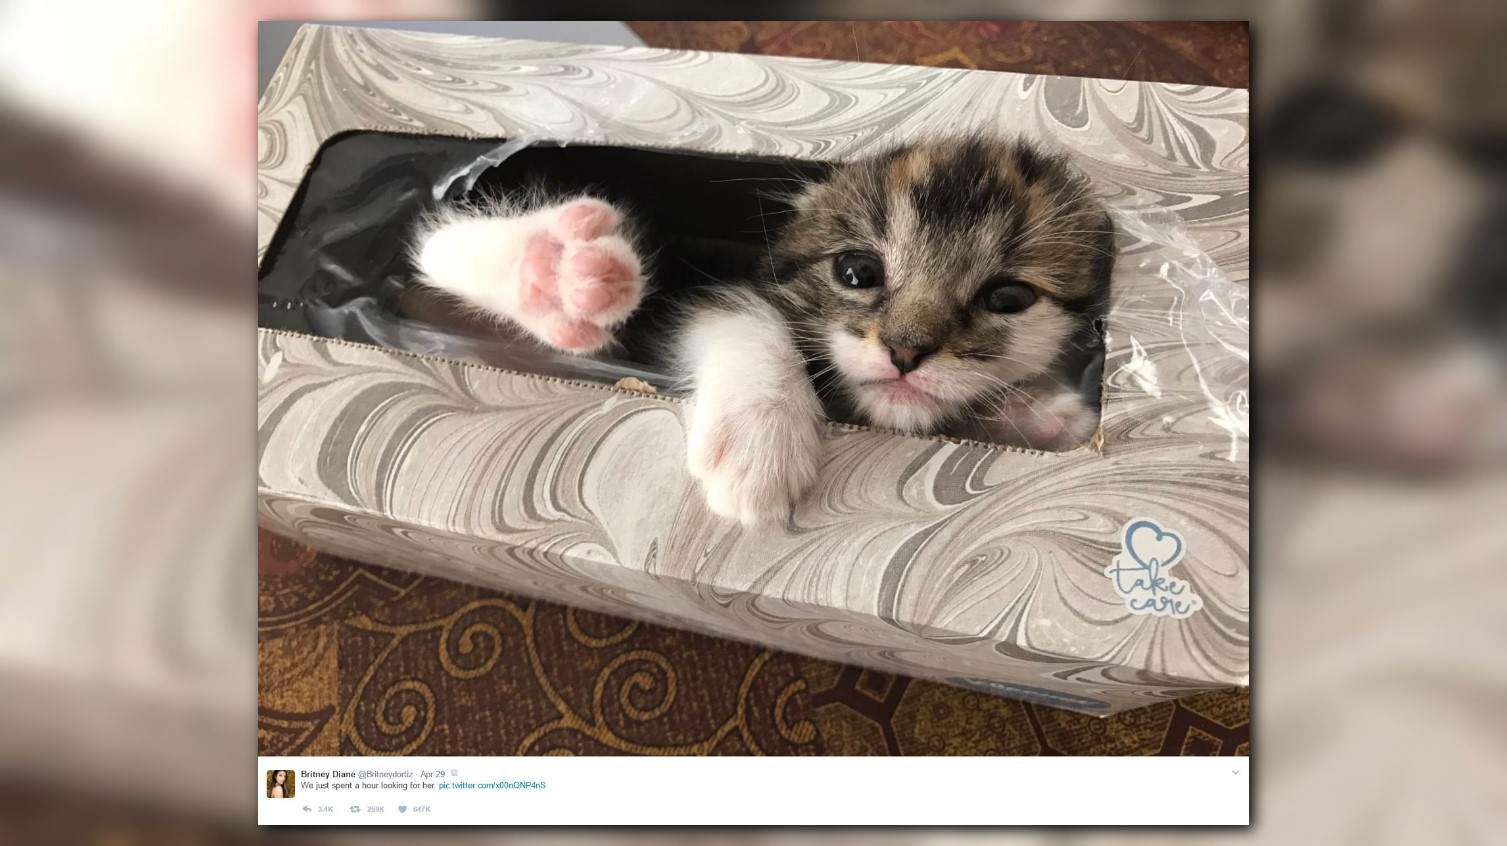 12news.com | Missing kitten found adorably tuckered out in tissue box1507 x 846